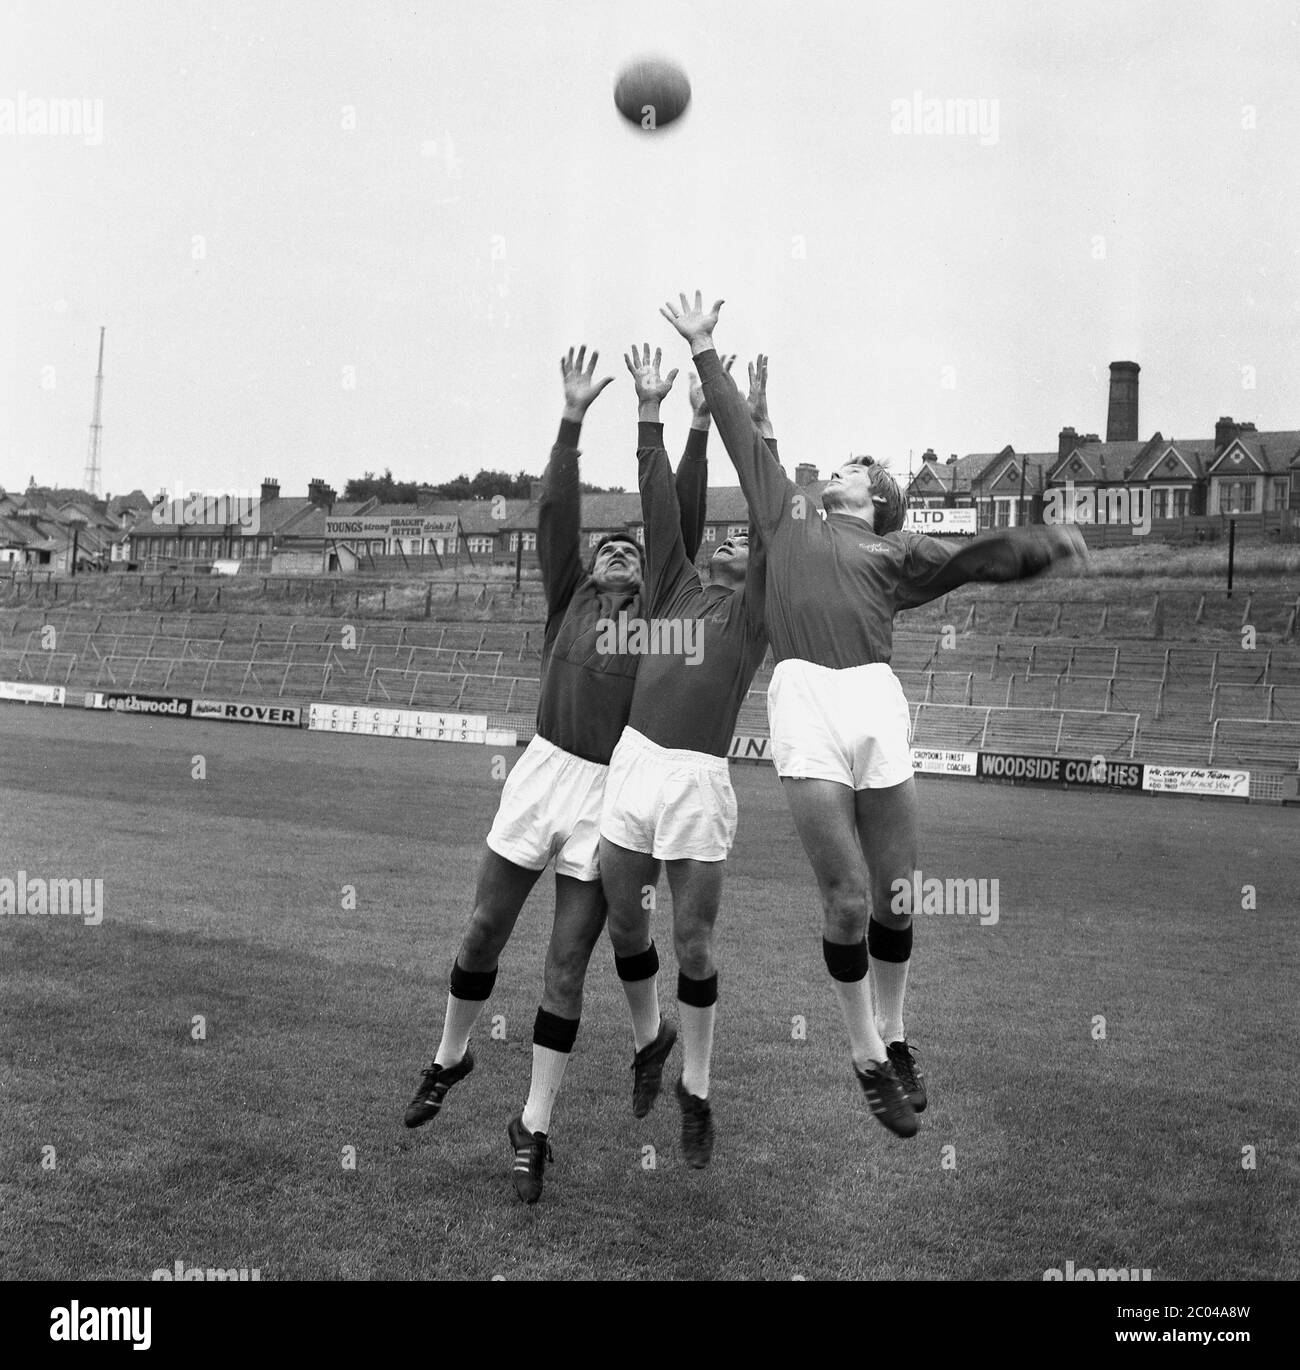 1960s, historical, three goalkeepers leaping for the ball as they train together on the pitch at Crystal Palace FC, Croydon, South London, England, UK. The large banked terraces with metal barriers where football supporters stood and watched a match in this era can be seen in the background. Stock Photo